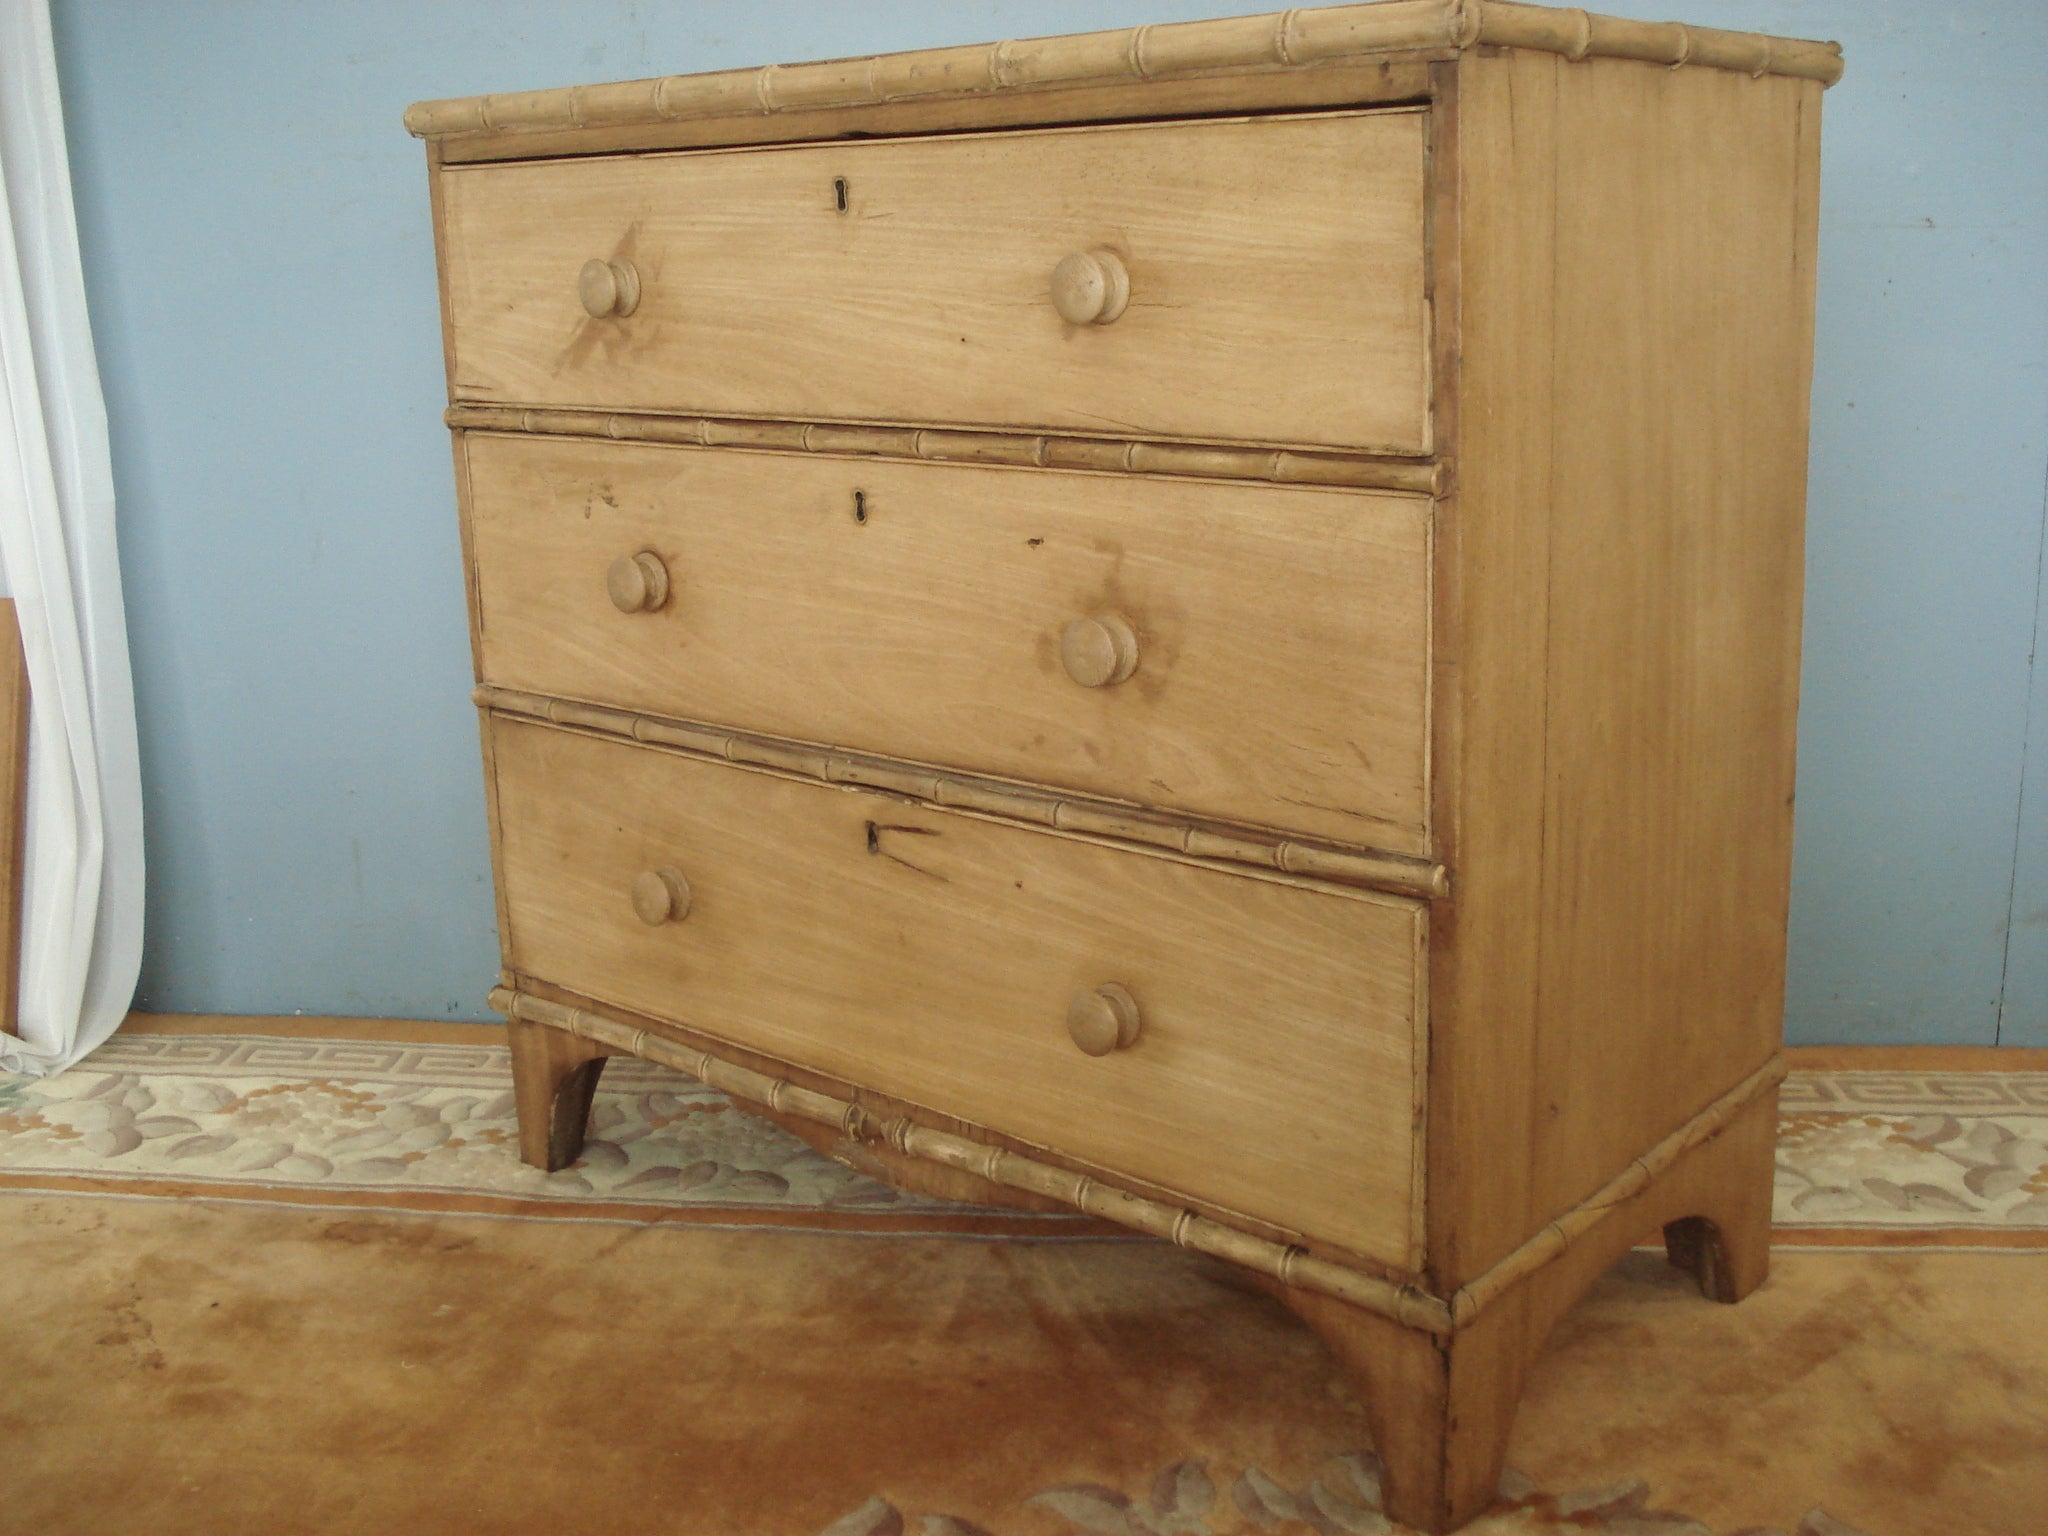 Regency Three Drawer Chest with simulated bamboo decoration